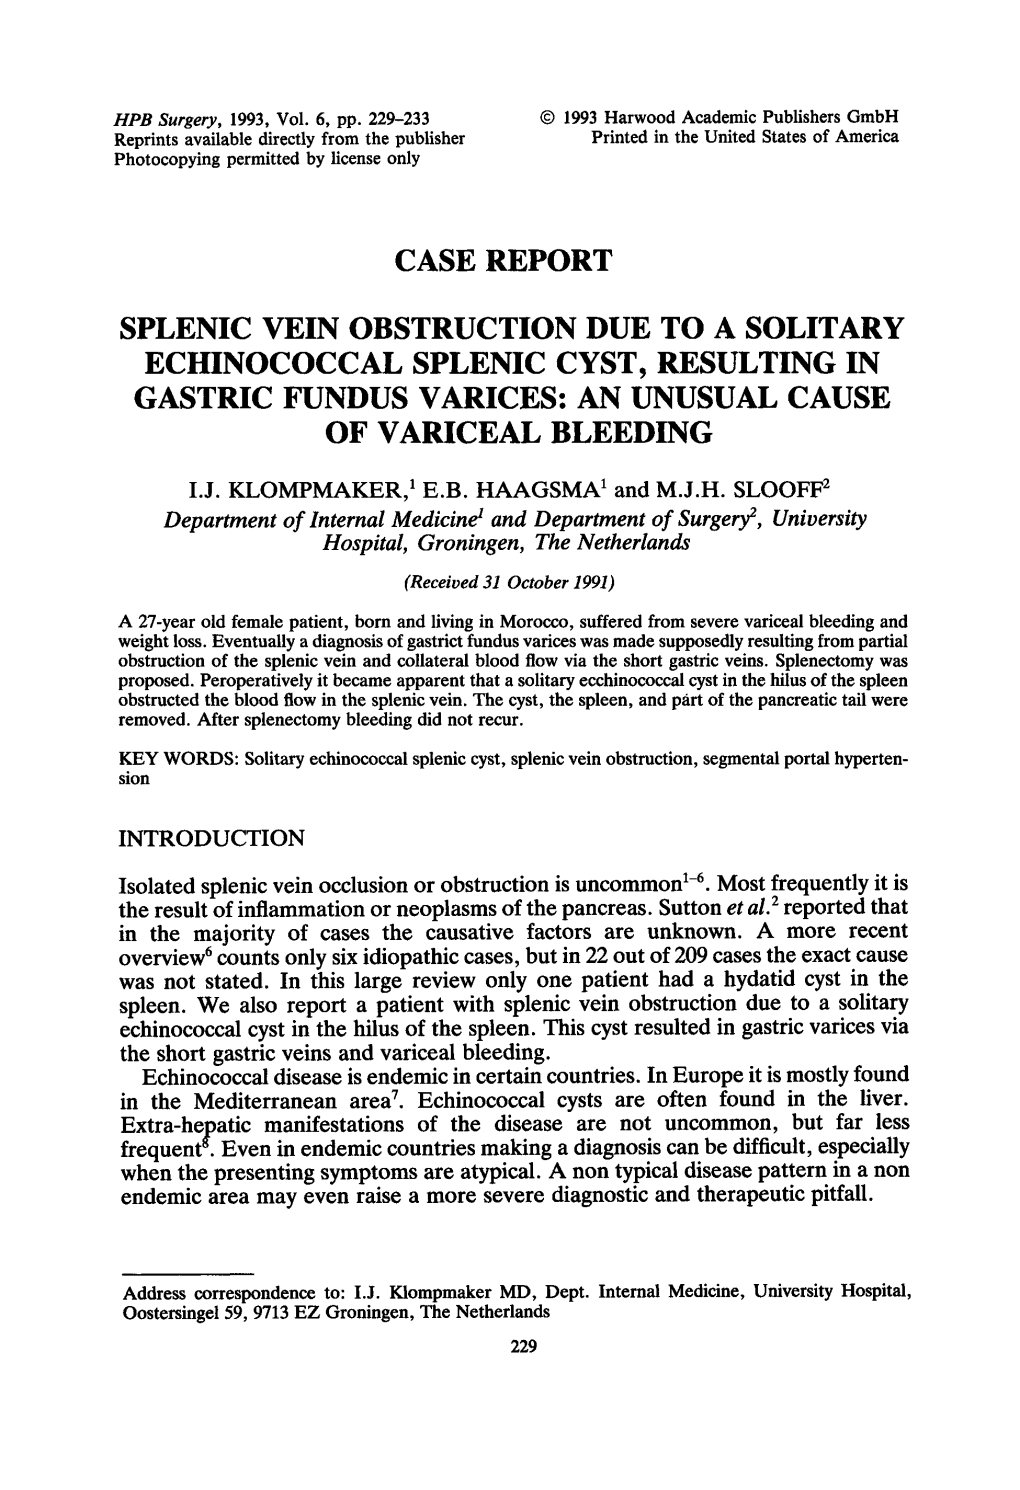 Case Report Splenic Vein Obstruction Due to a Solitary Echinococcal Splenic Cyst, Resulting in Gastric Fundus Varices: an Unusual Cause of Variceal Bleeding